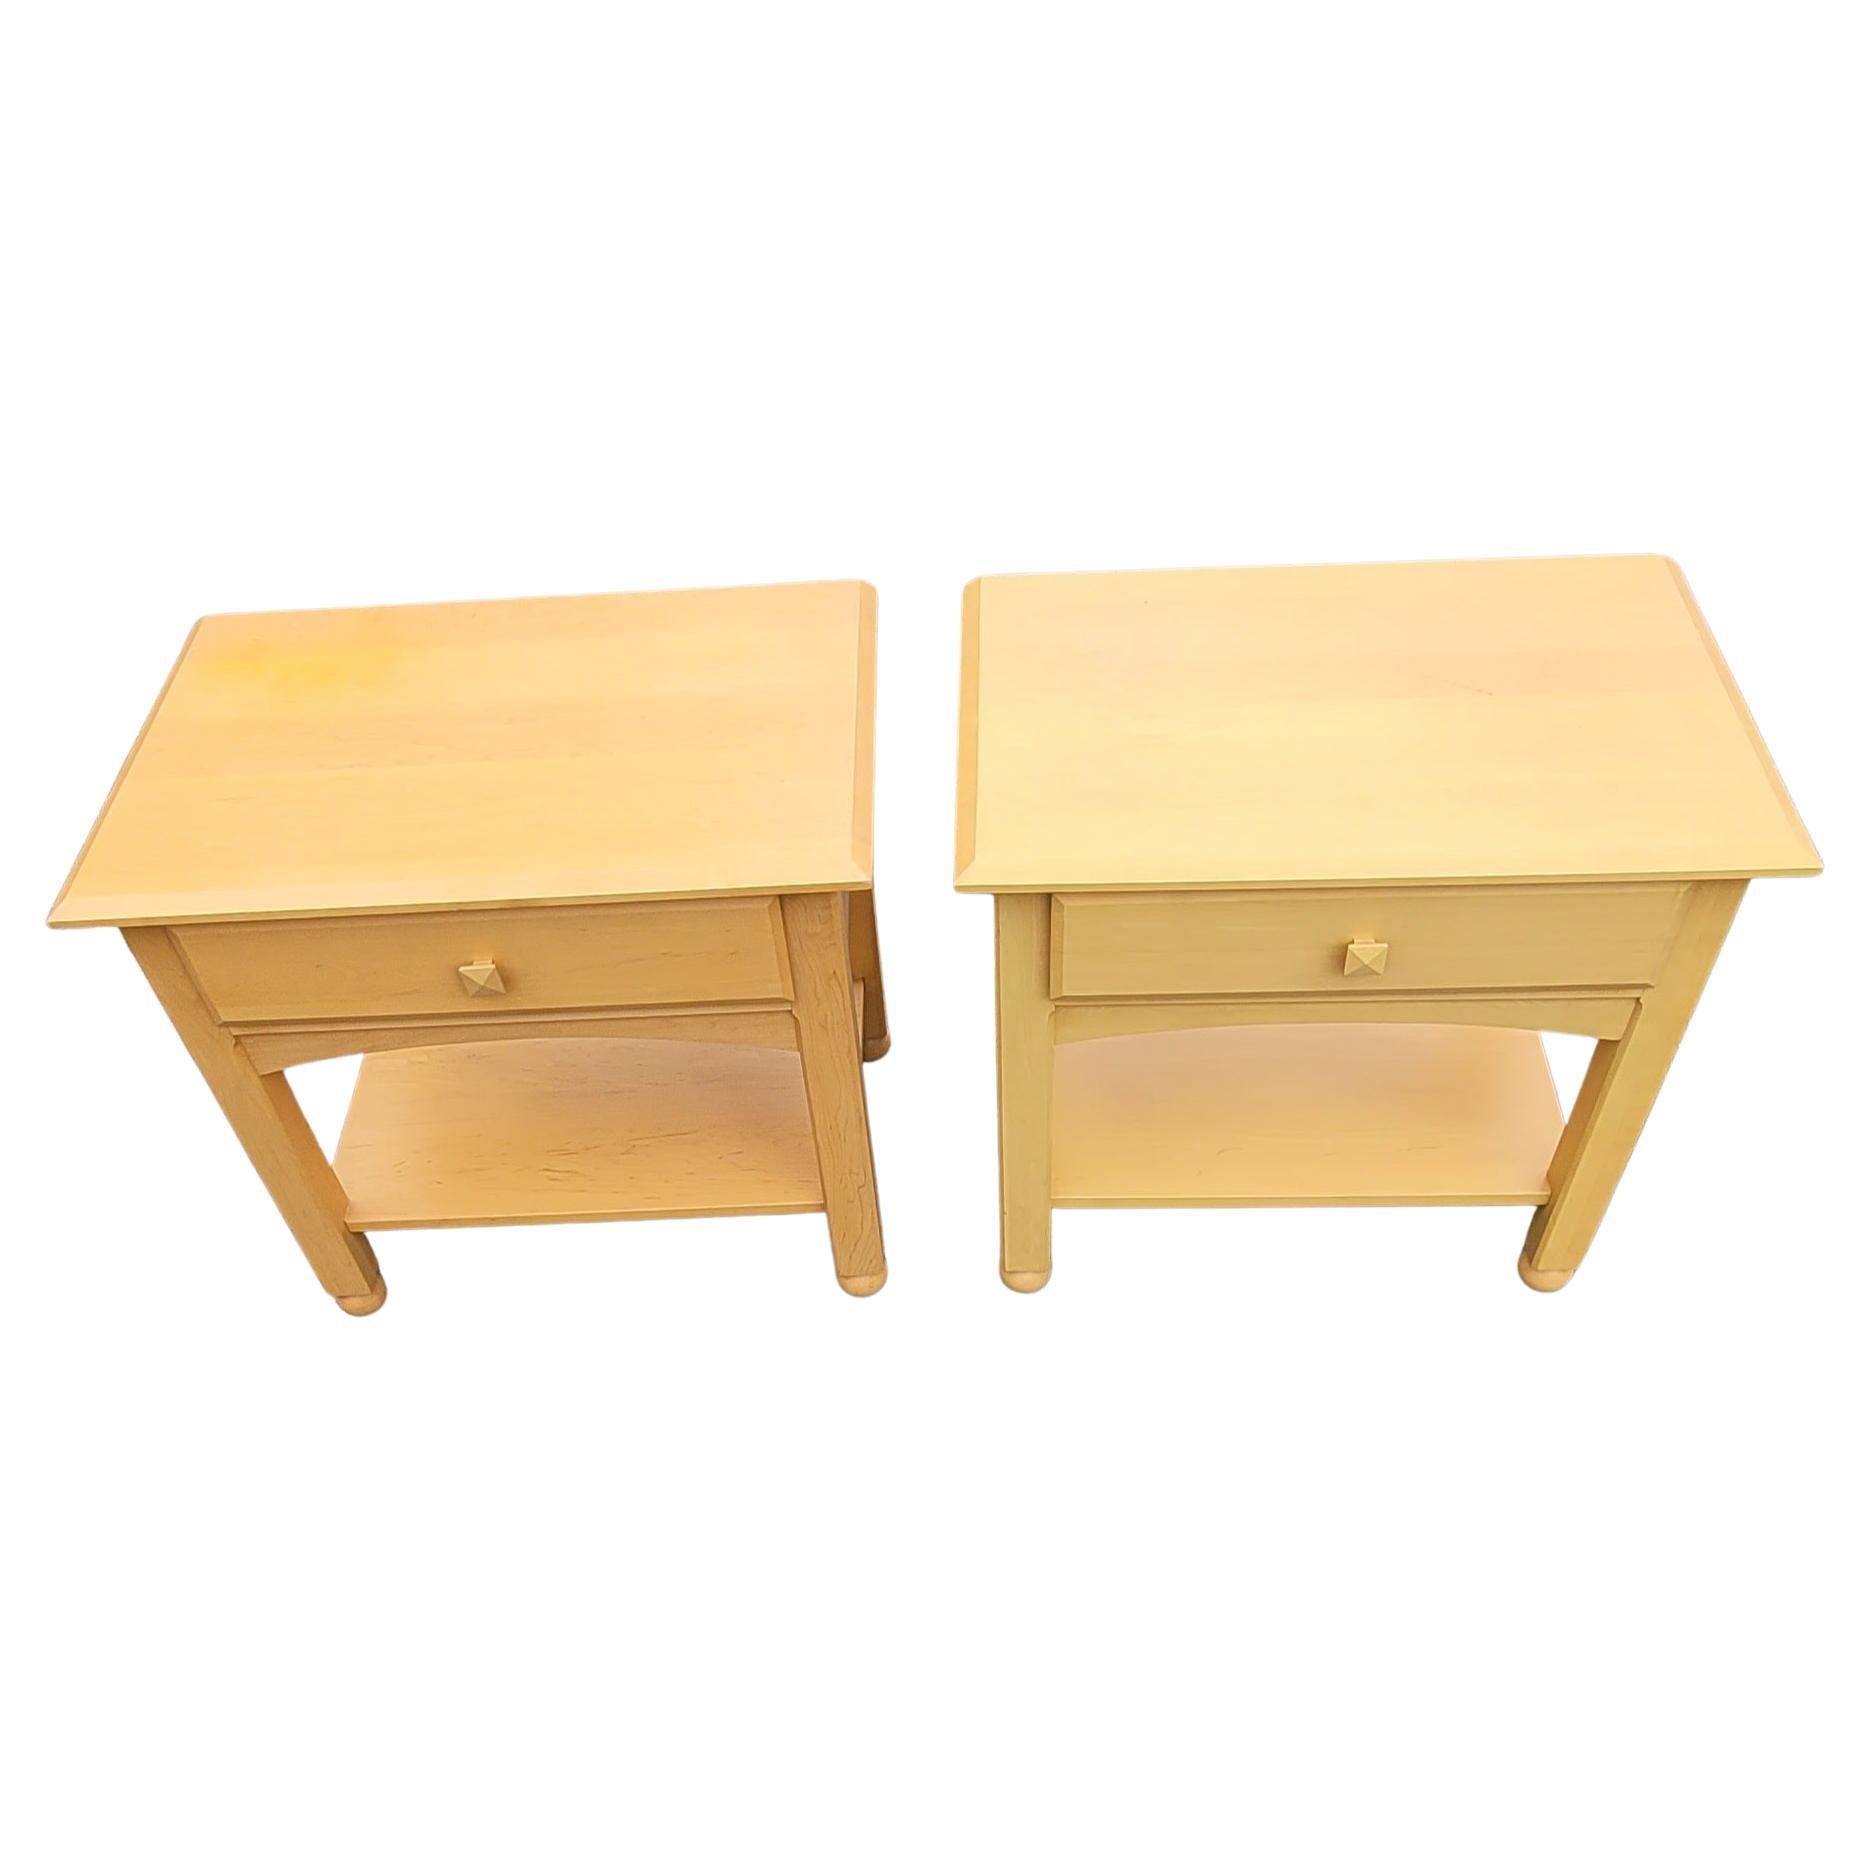 Modern Ethan Allen American Dimensions Collection Birch Bedside Tables Nightstands